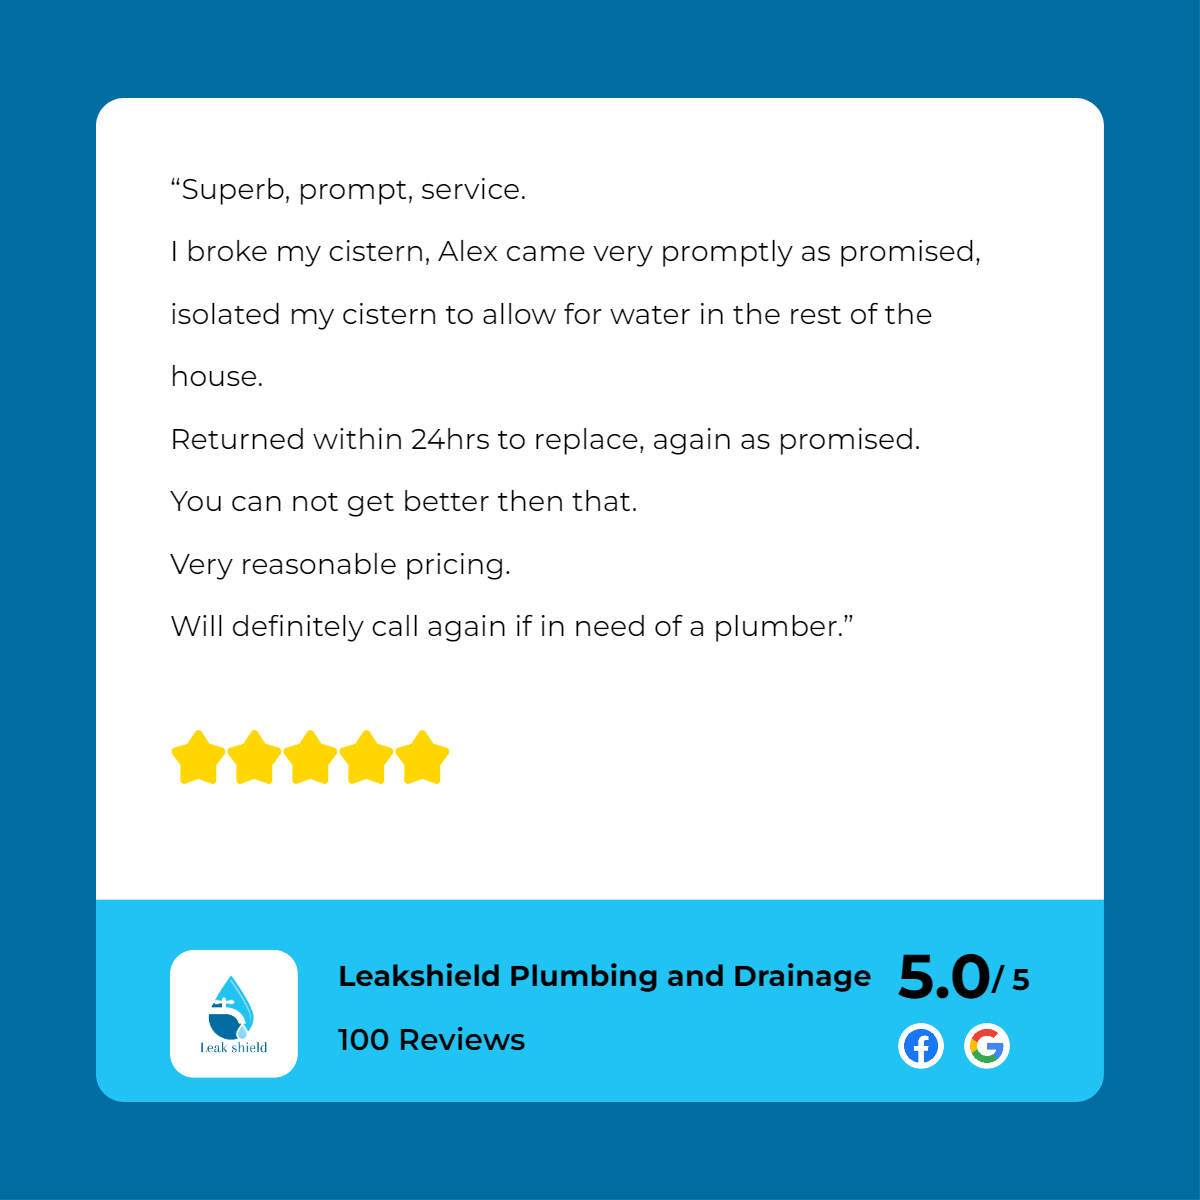 A customer review for leeds plumbing and catagory.